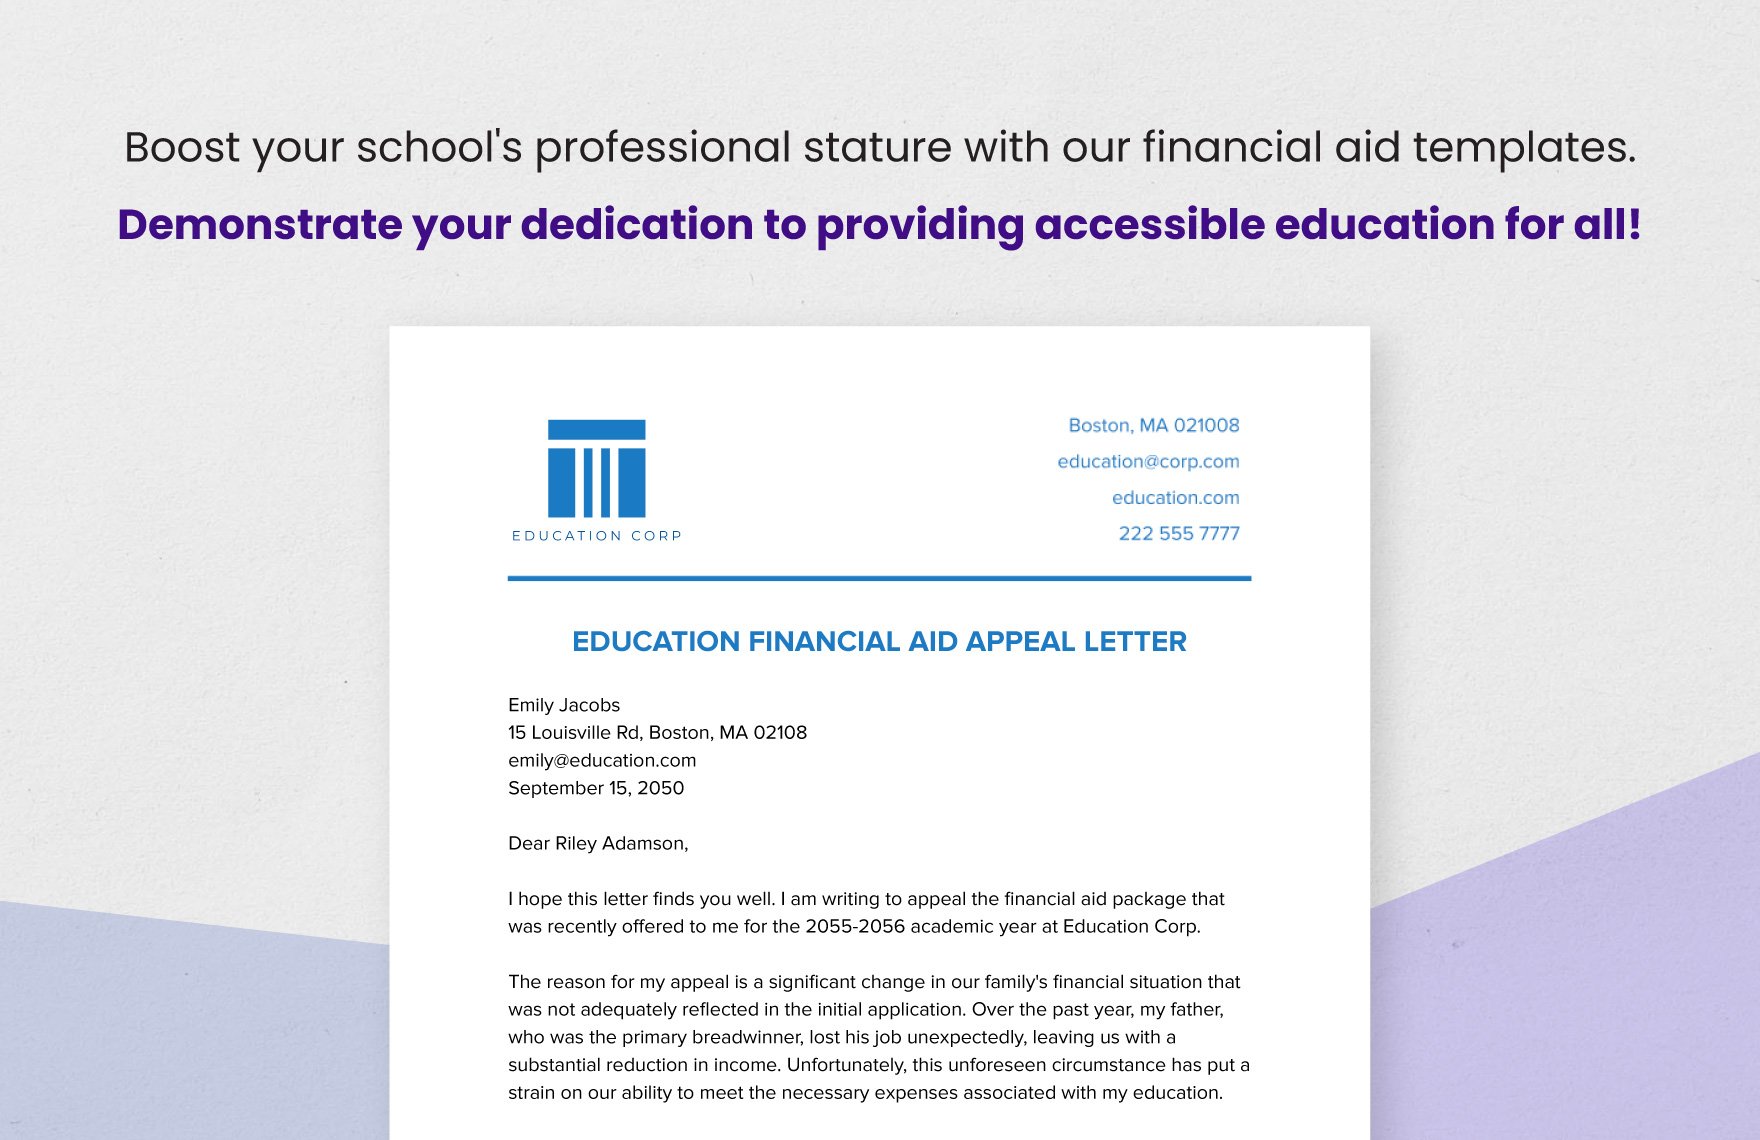 Education Financial Aid Appeal Letter Template